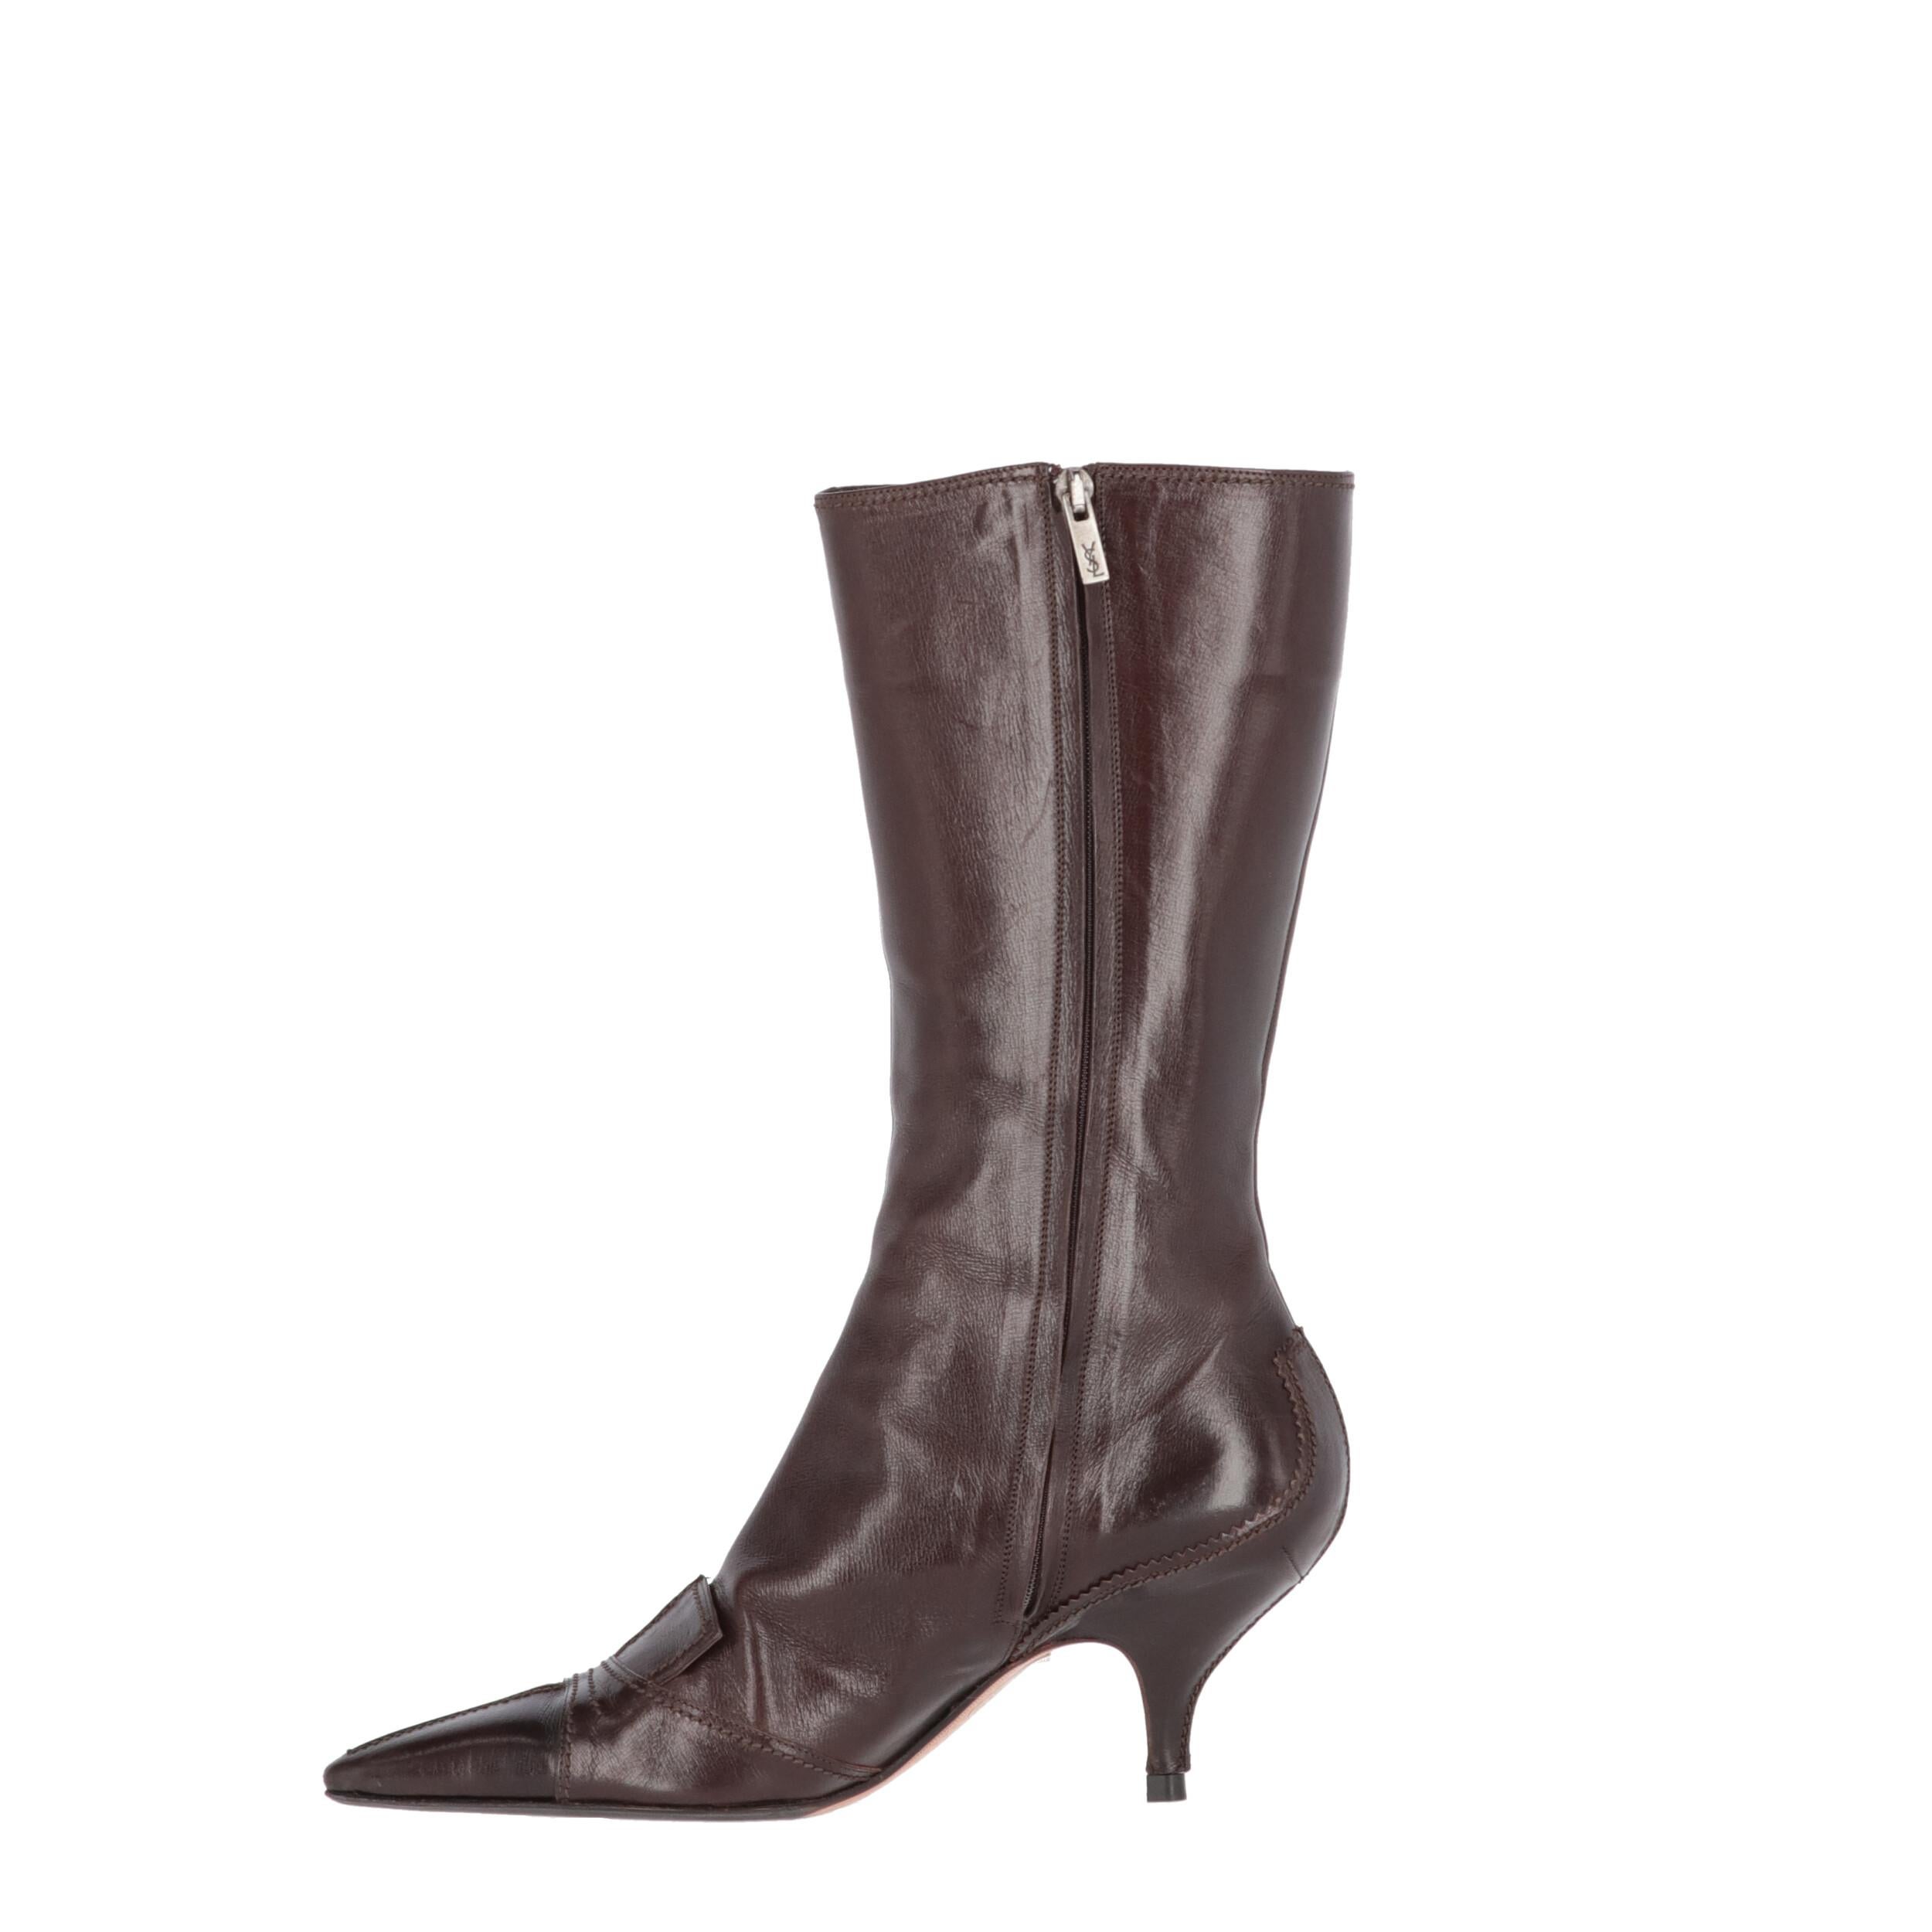 Yves Saint Laurent brown leather mid-calf boots. Pointed design and multi-piece upper. Full-length zip fastening on the inside leg and logoed metal puller. Low stiletto heel.

Boots show slight signs of wear on the leather and the sole, as shown in